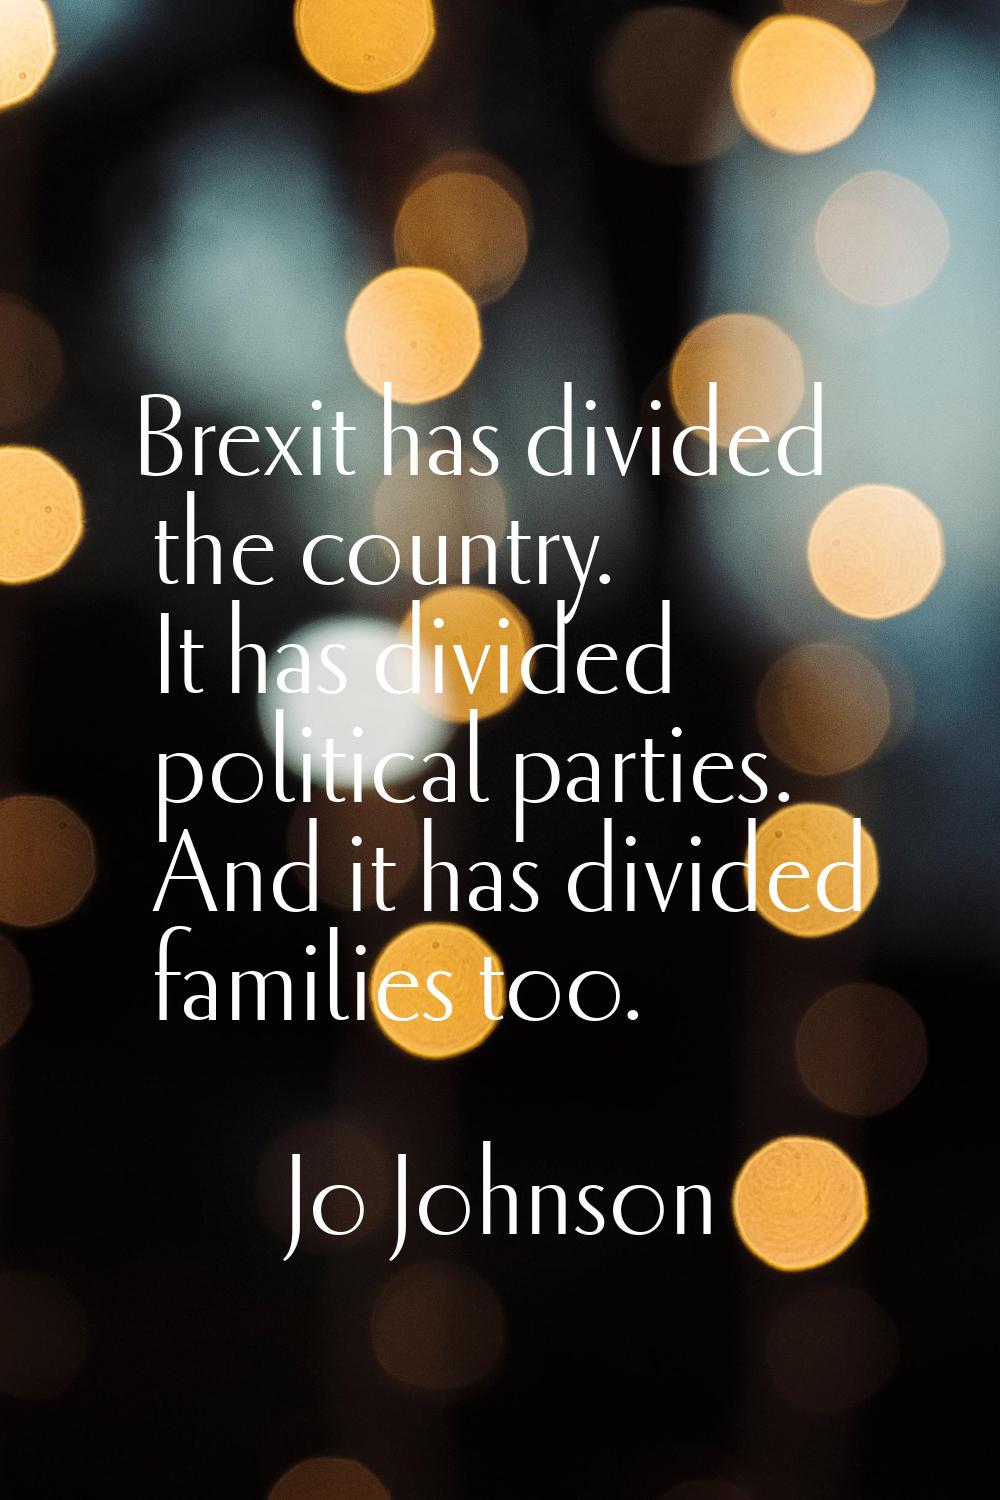 Brexit has divided the country. It has divided political parties. And it has divided families too.